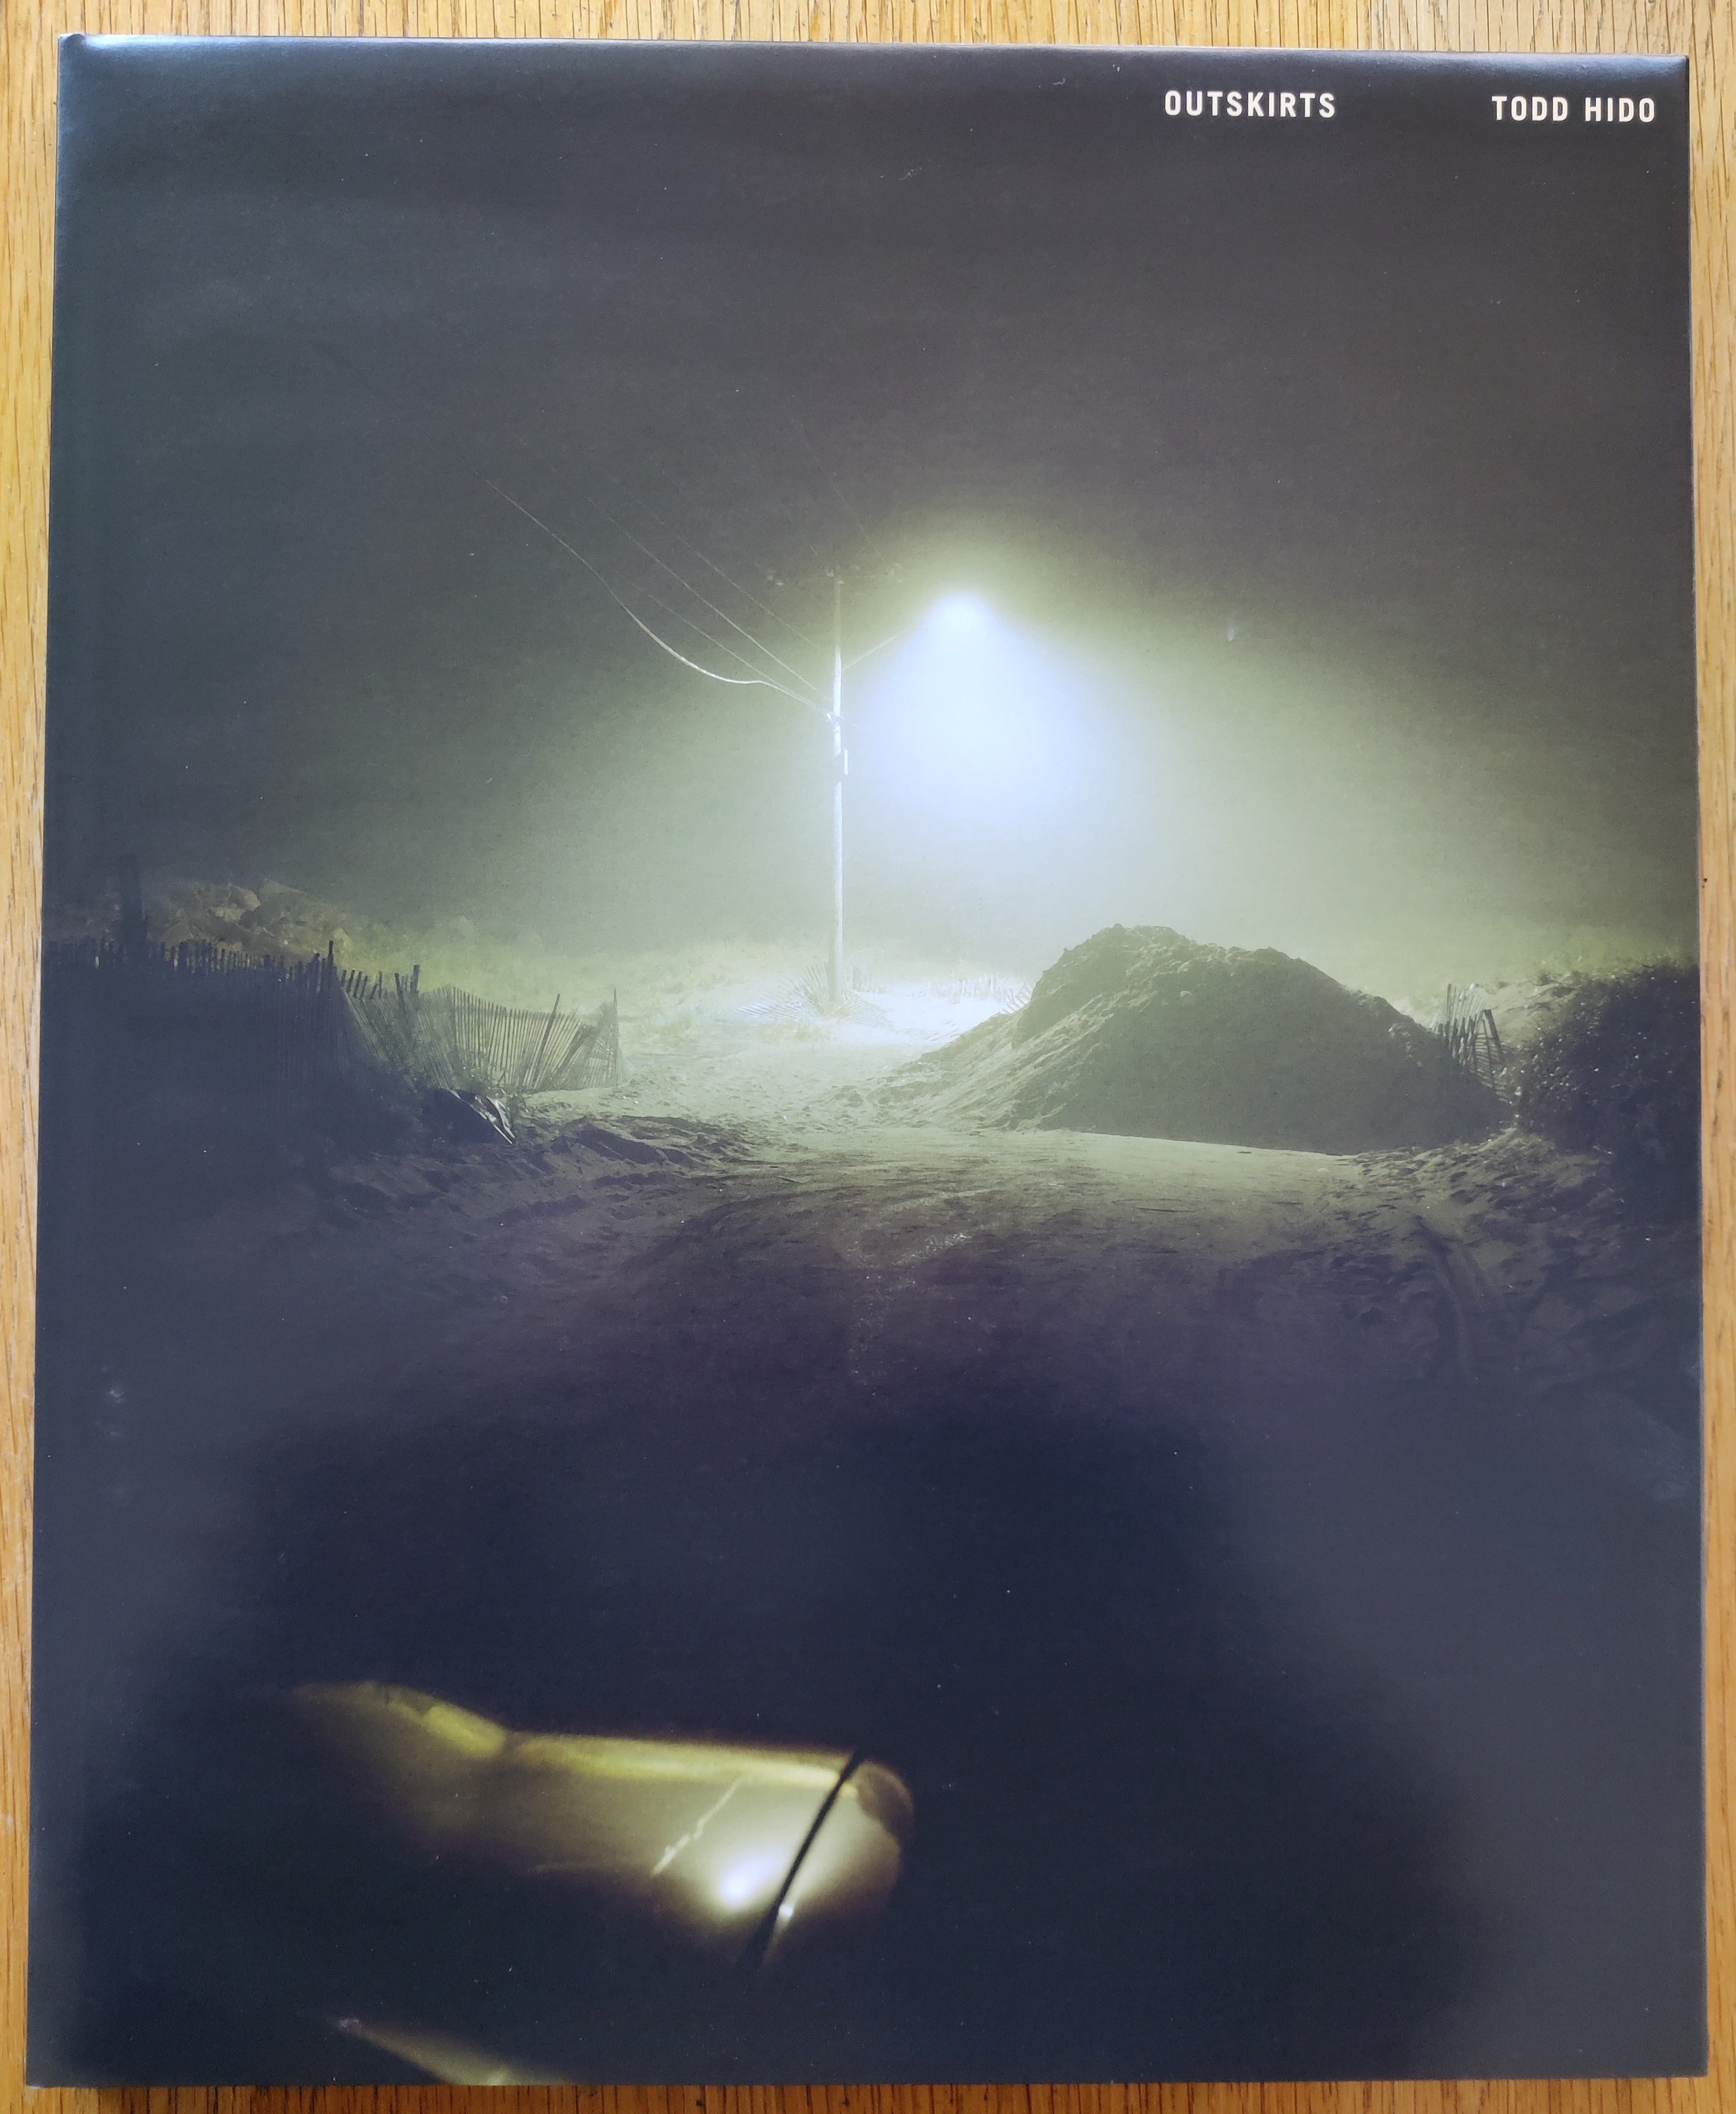 Buy Outskirts by Todd Hido signed Deluxe edition with print online